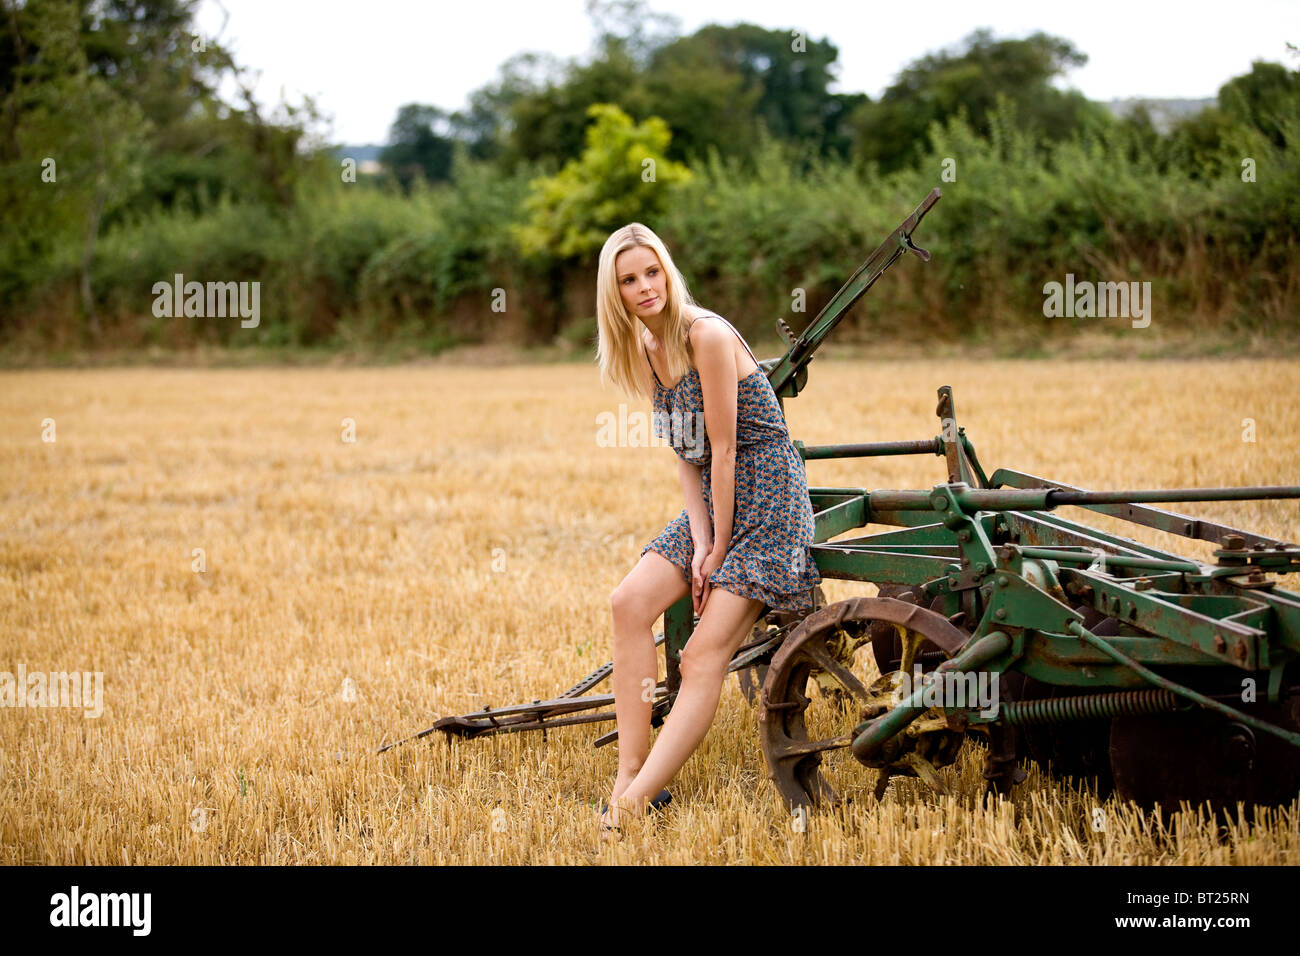 A woman sitting on farm machinery in a harvested wheatfield Stock Photo